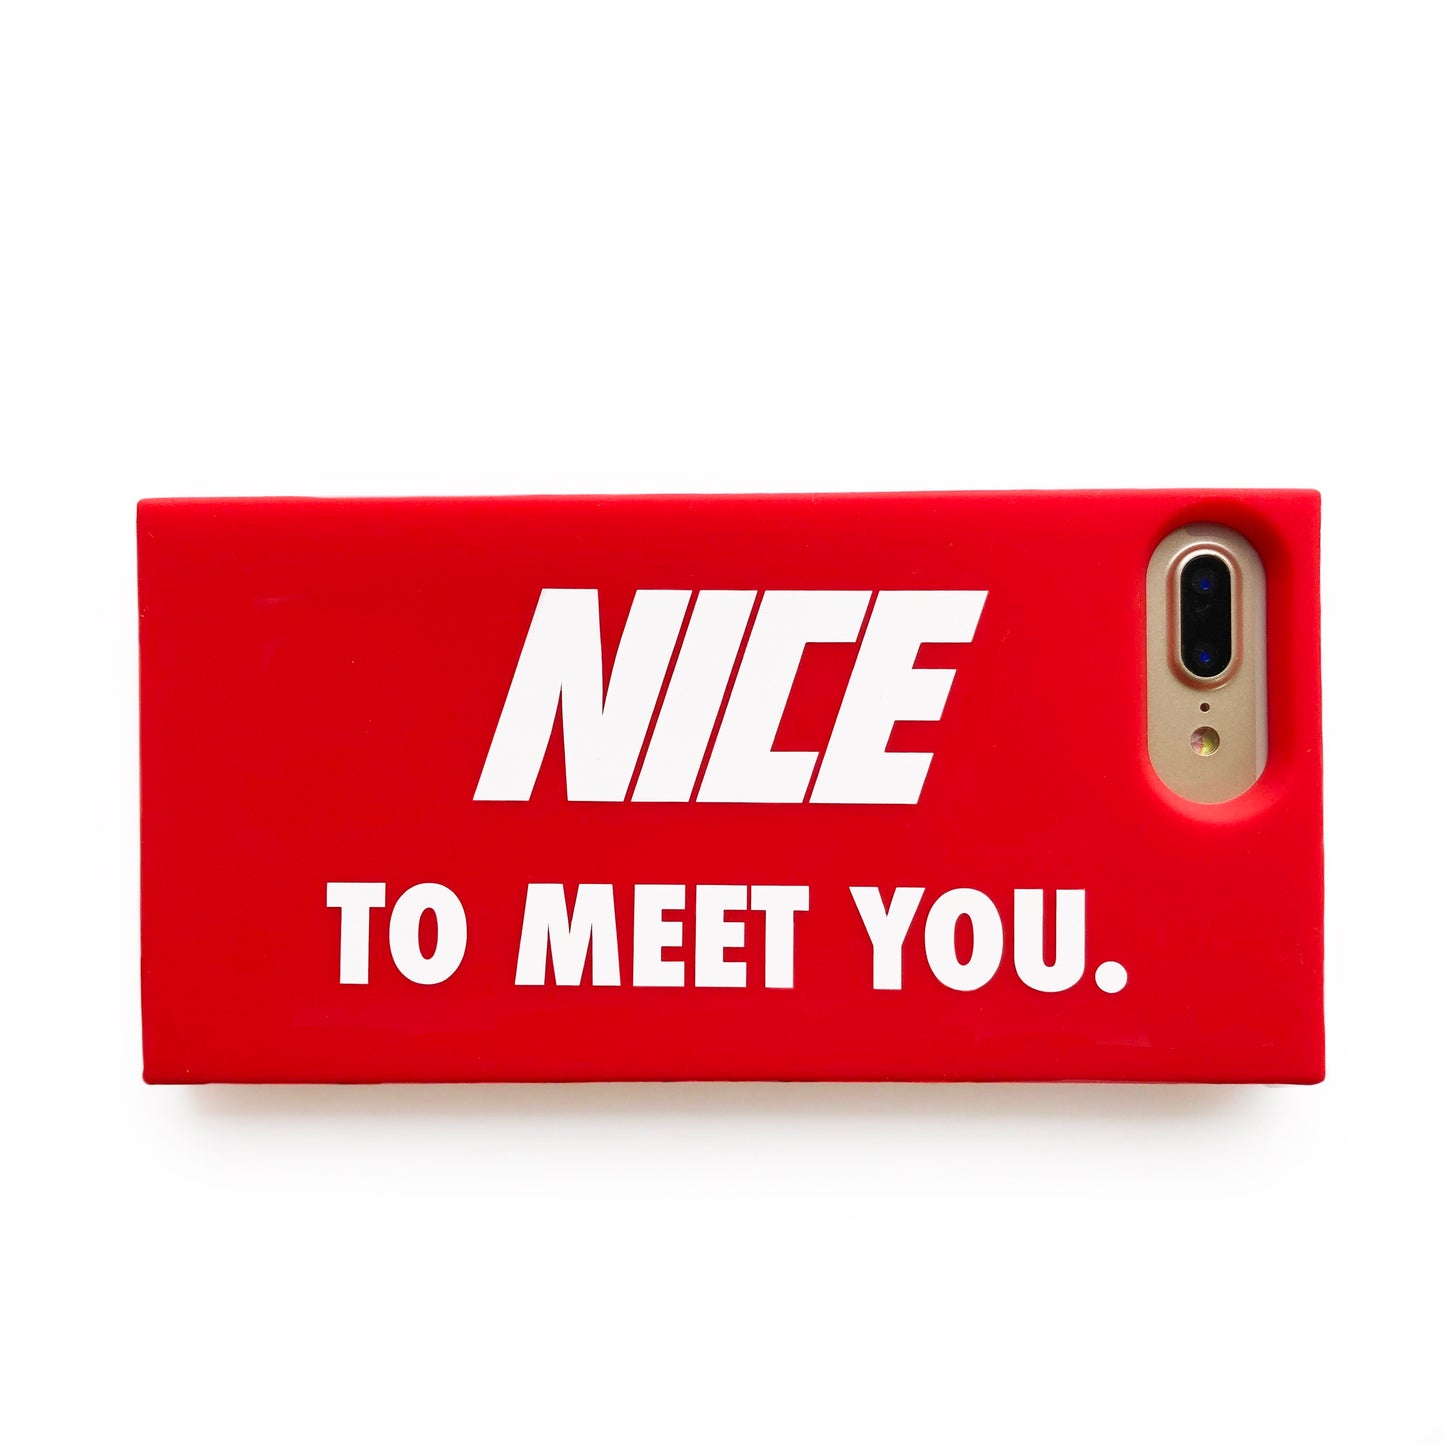 iPhone 7 Plus/8 Plus Simple Case - Nice to Meet You (Red)